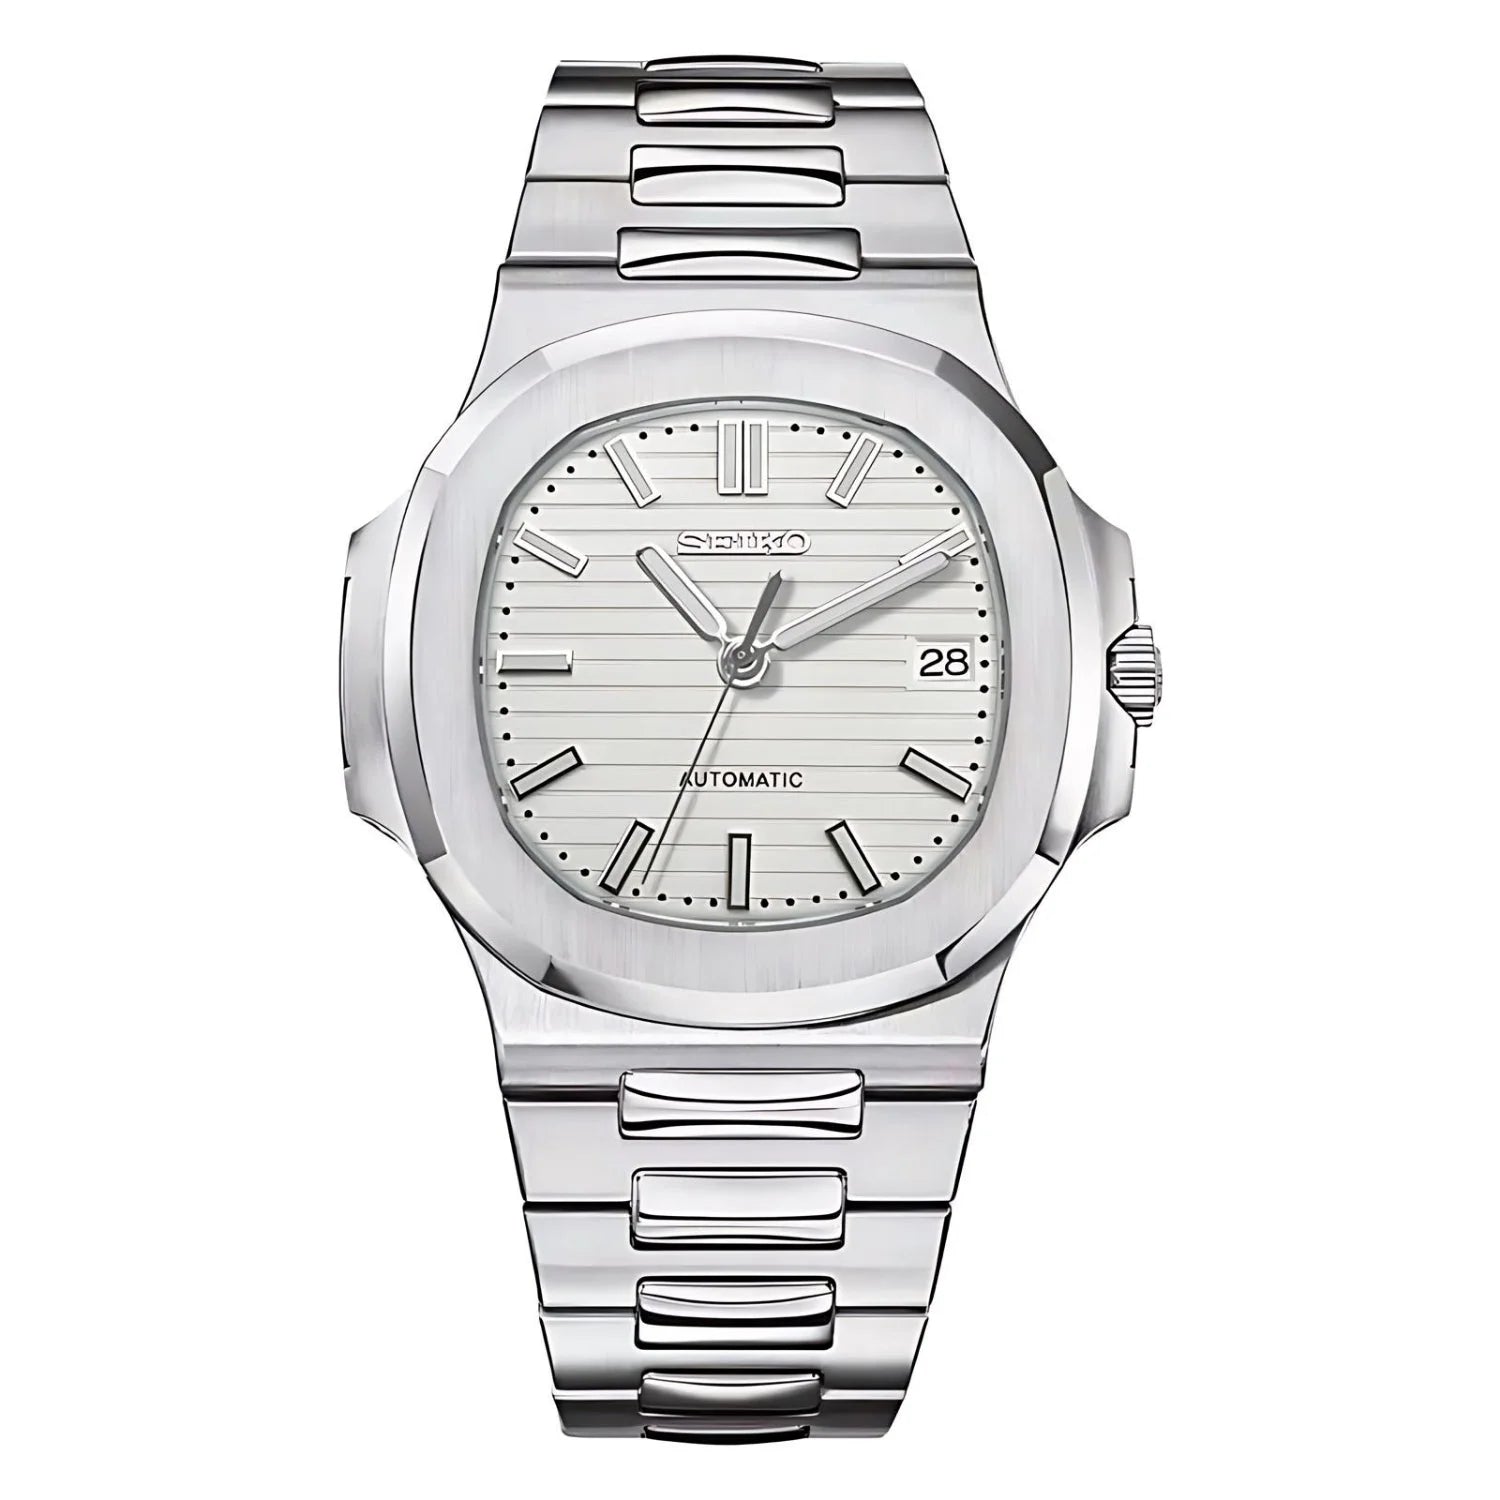 Nautiko White Watch: Silver Stainless Steel With White Dial And Octagonal Case Bezel